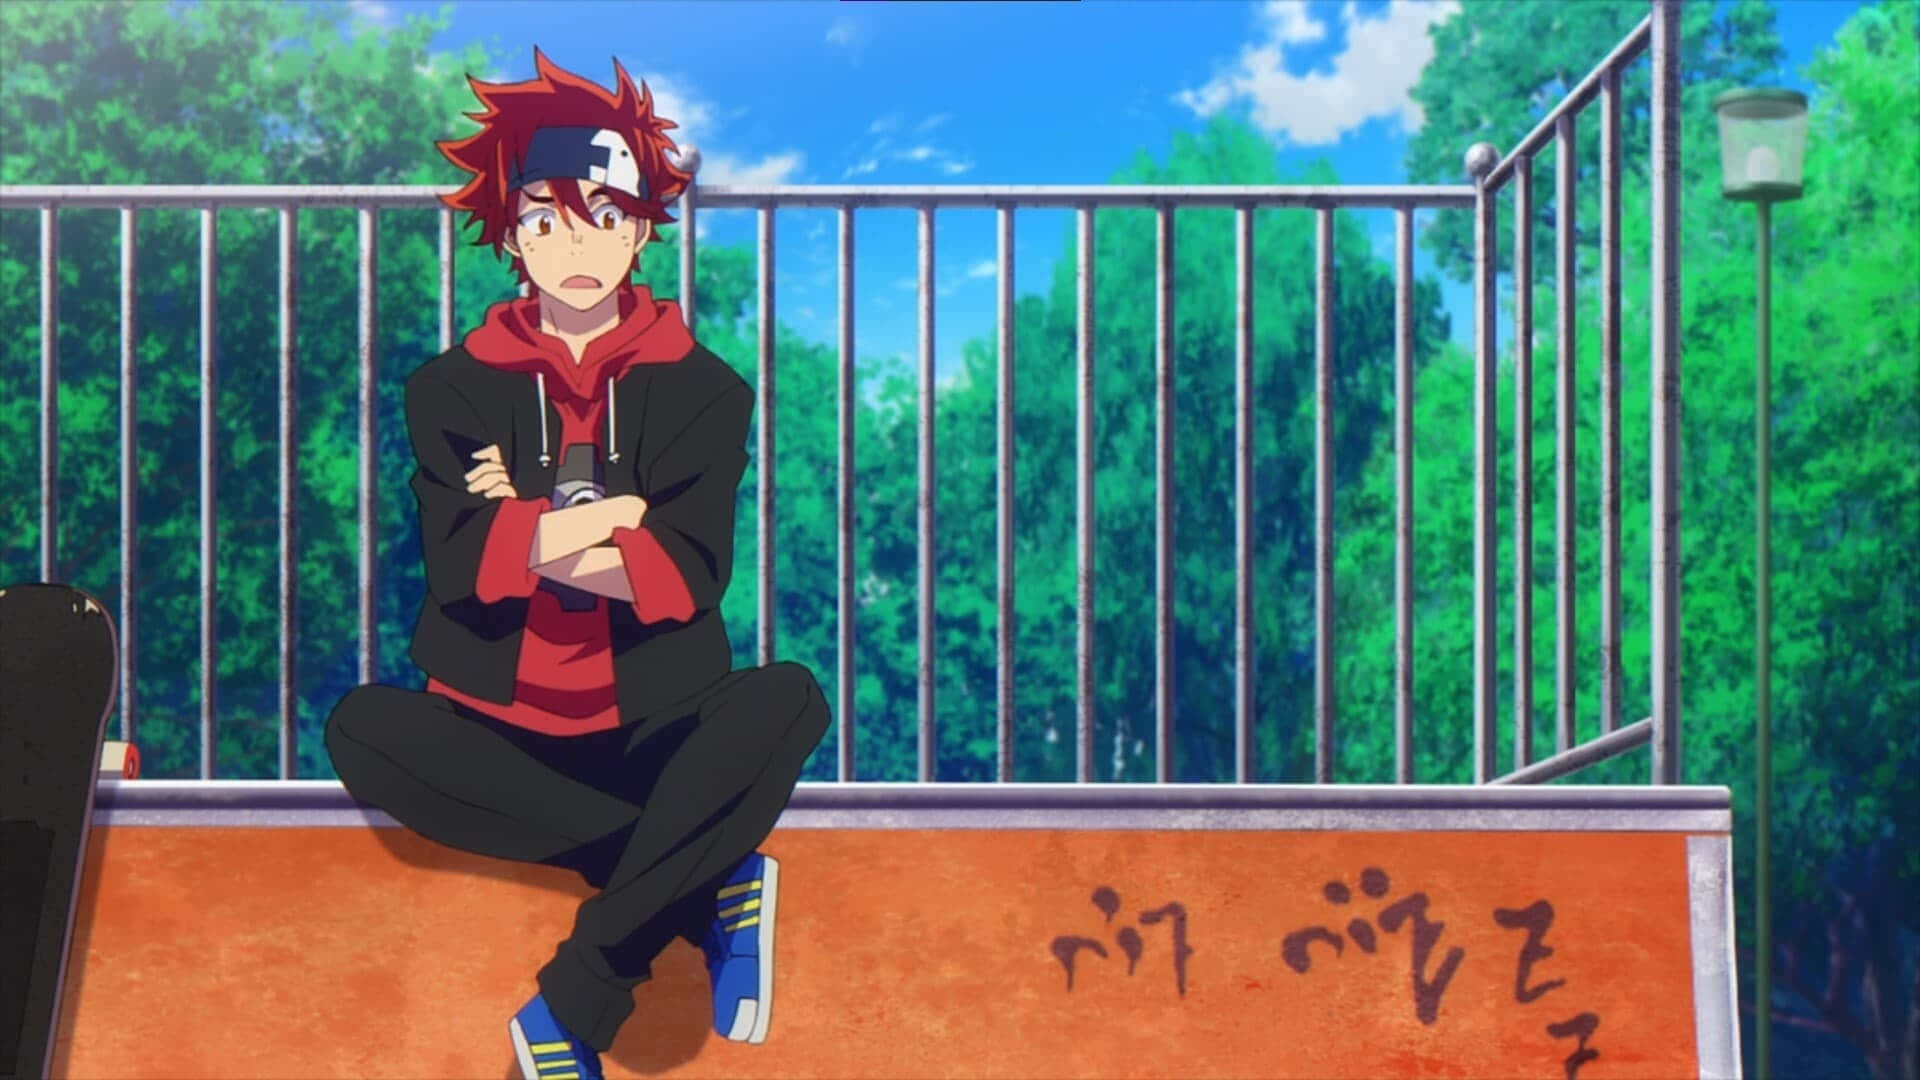 A Boy Sitting On A Ledge With A Red Hair